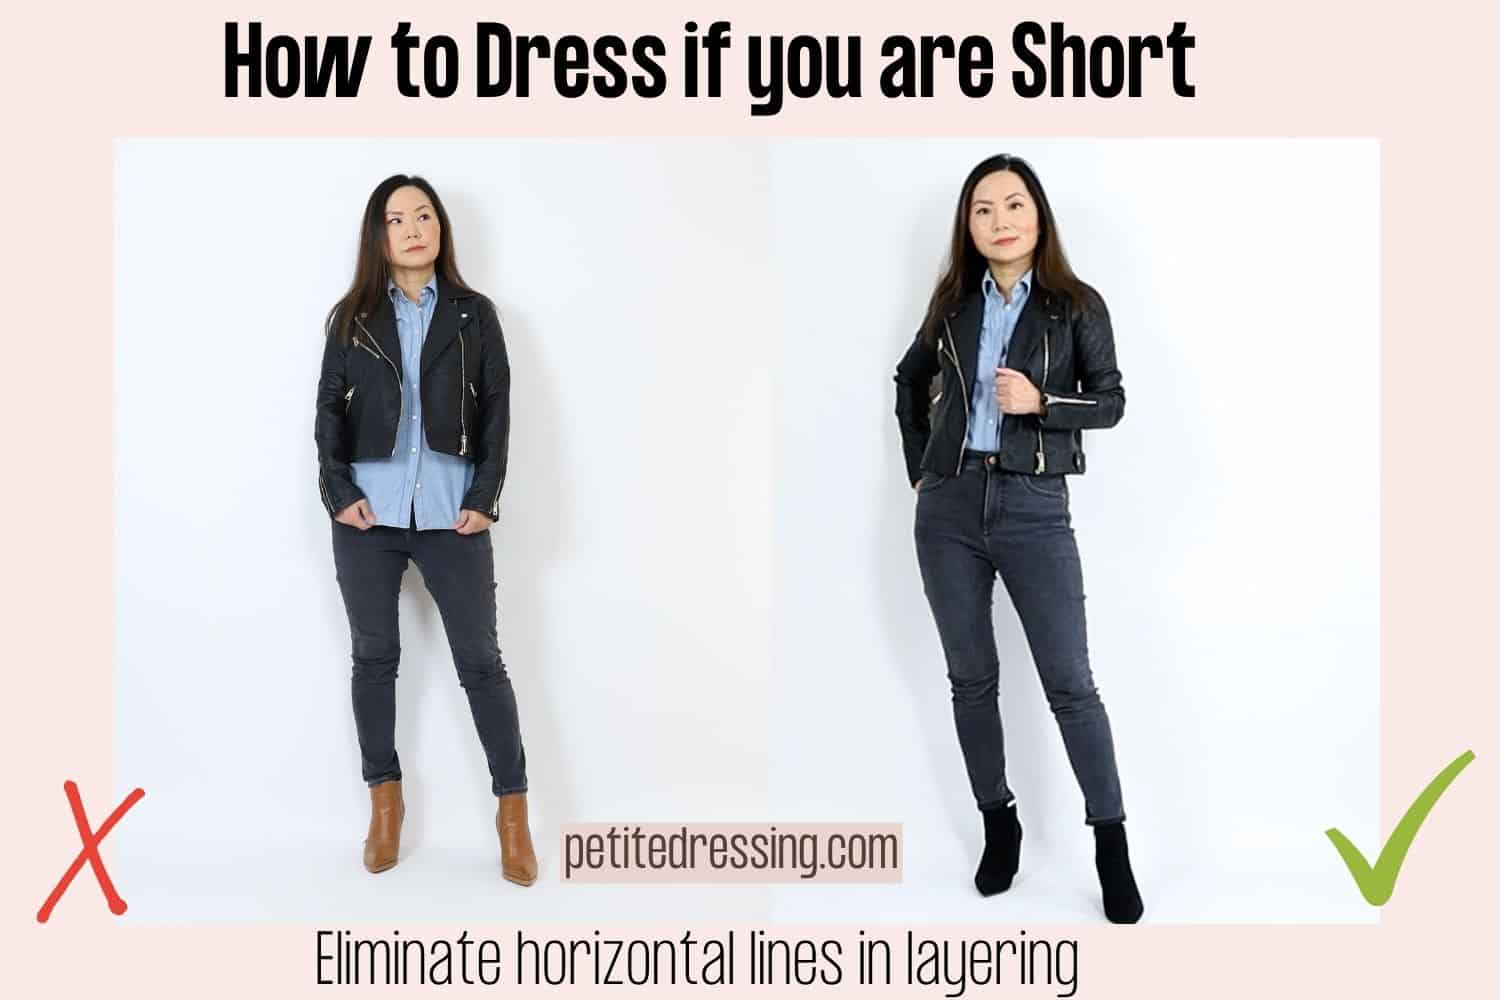 Rely on plot lava 30 Best Ways to Dress if you are Short (Comprehensive guide)